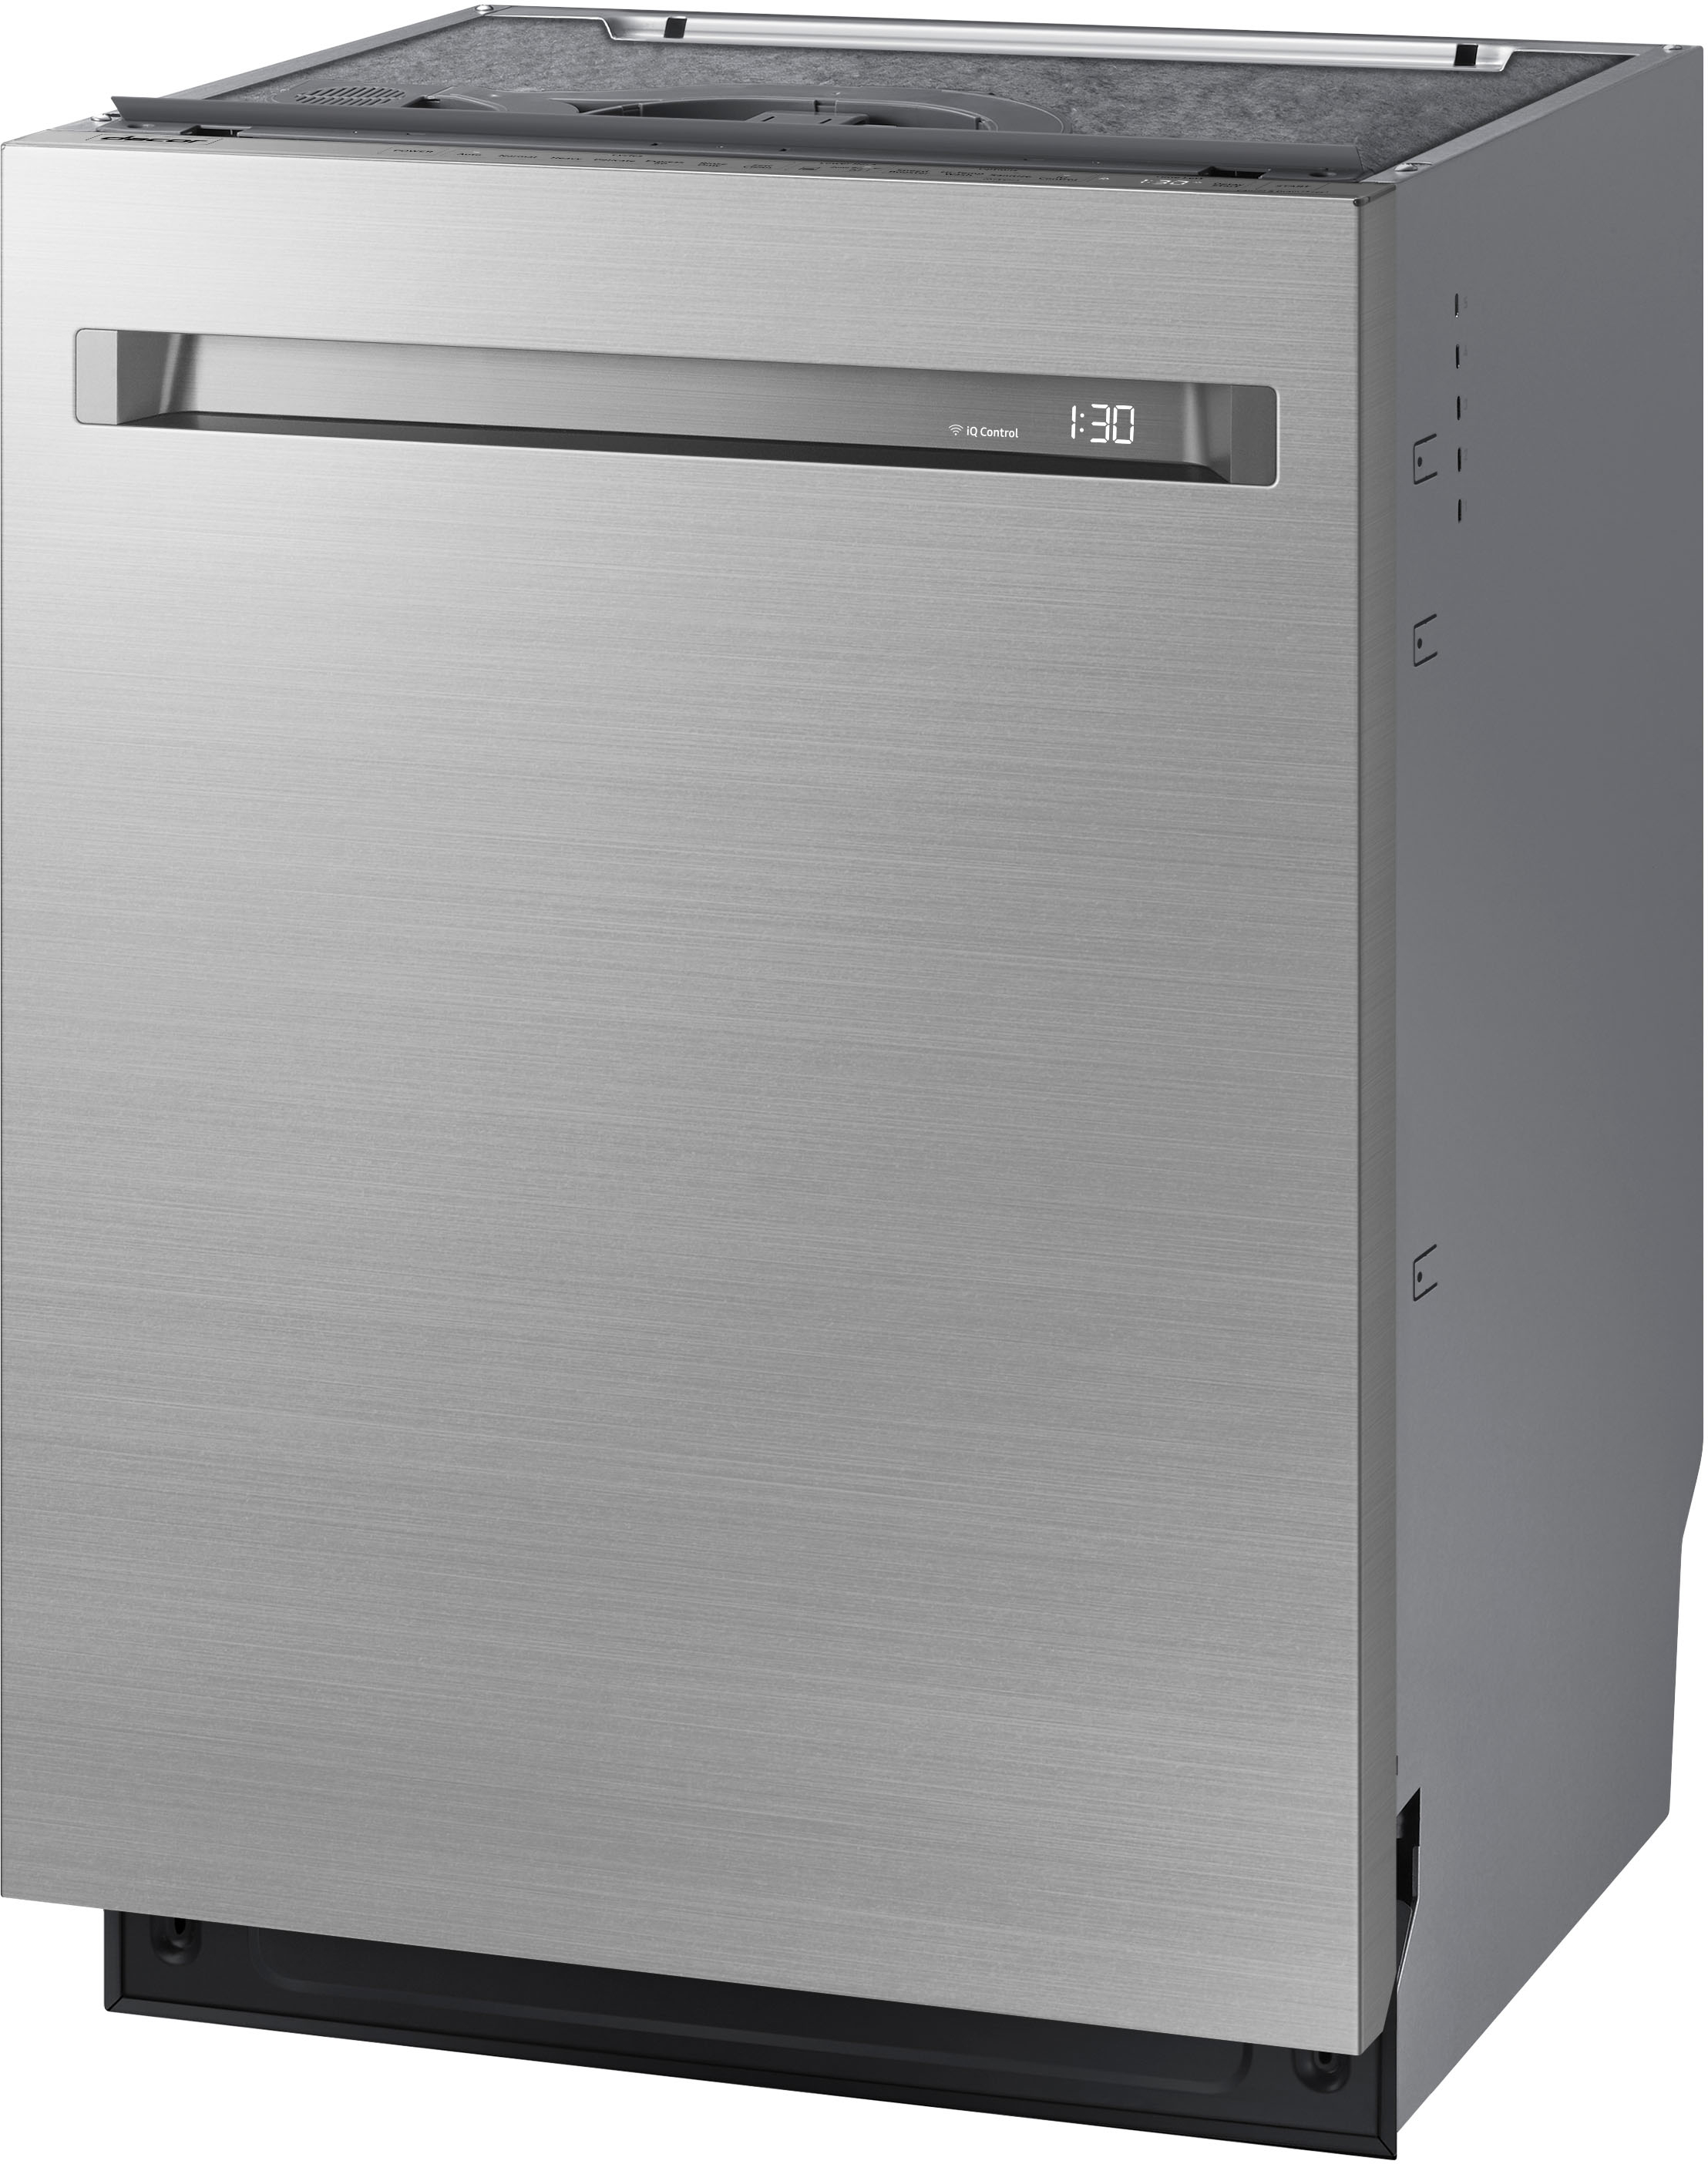 Angle View: Dacor - Top Control Built-In Dishwasher with Stainless Steel Tub, WaterWall™, AutoRelease Door, 3rd Rack, 44 dBA, Panel Ready - Custom Panel Ready